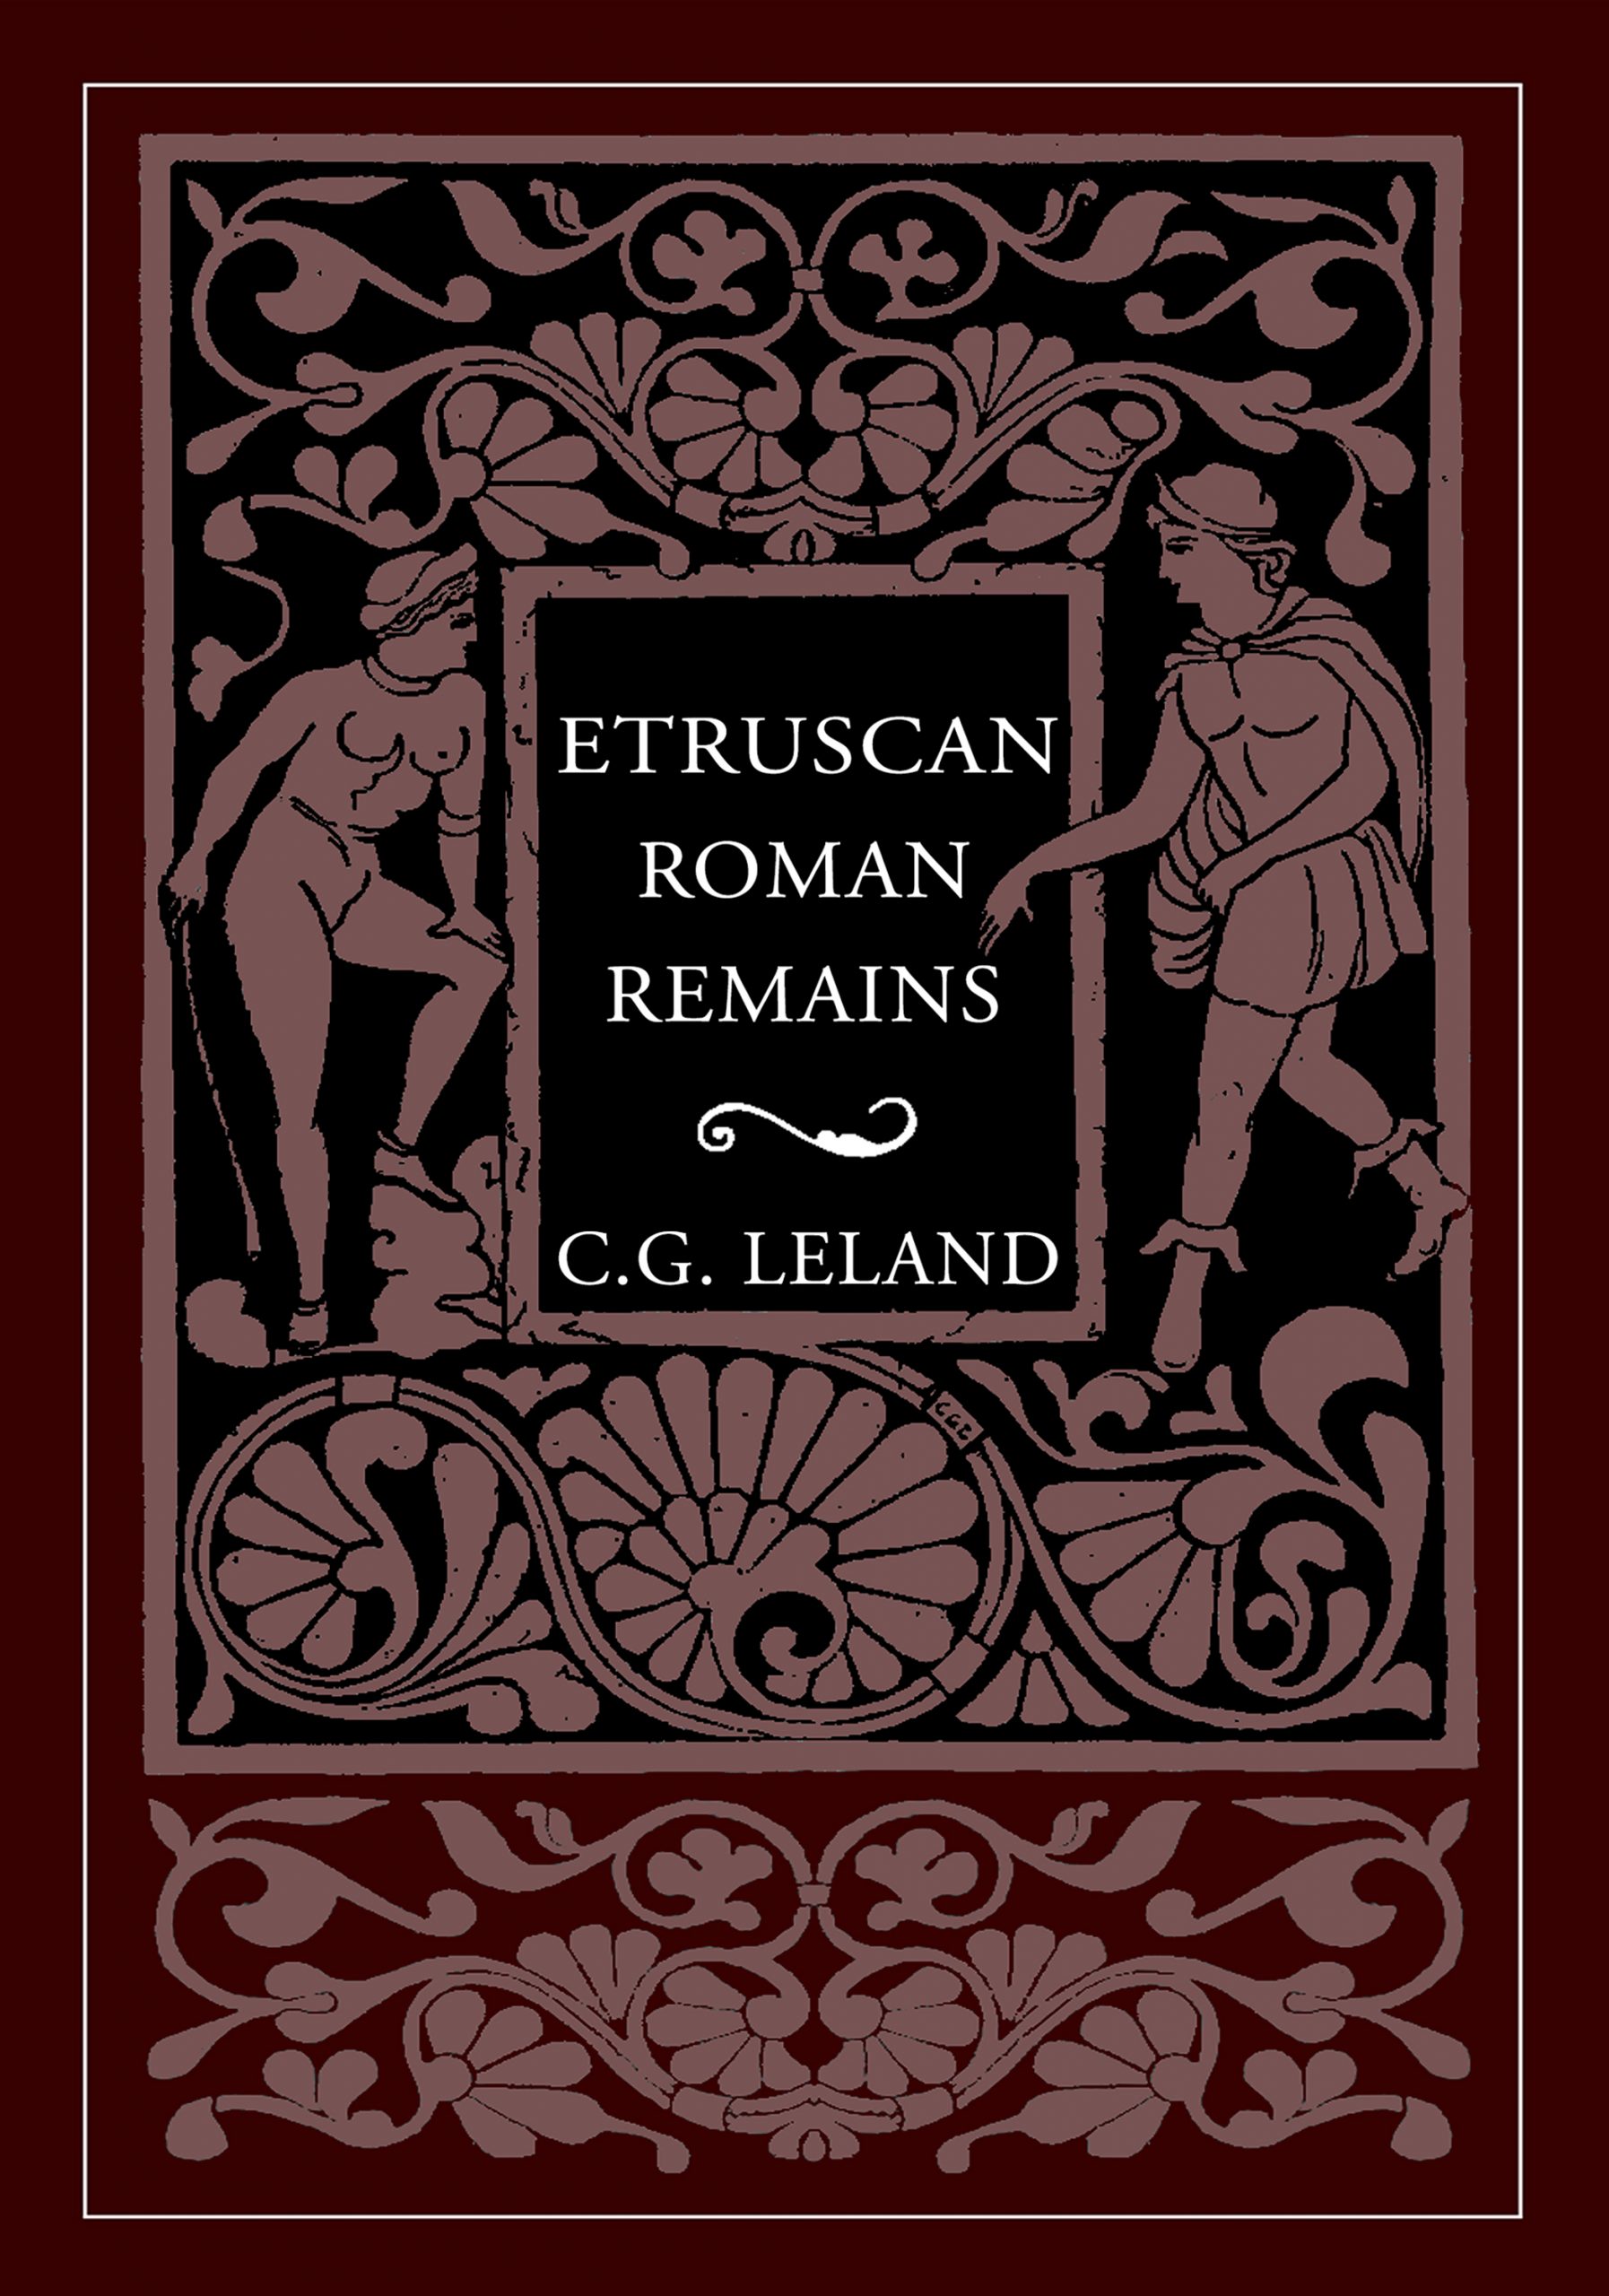 Etruscan Roman Remains - In popular Tradition - paperback cover